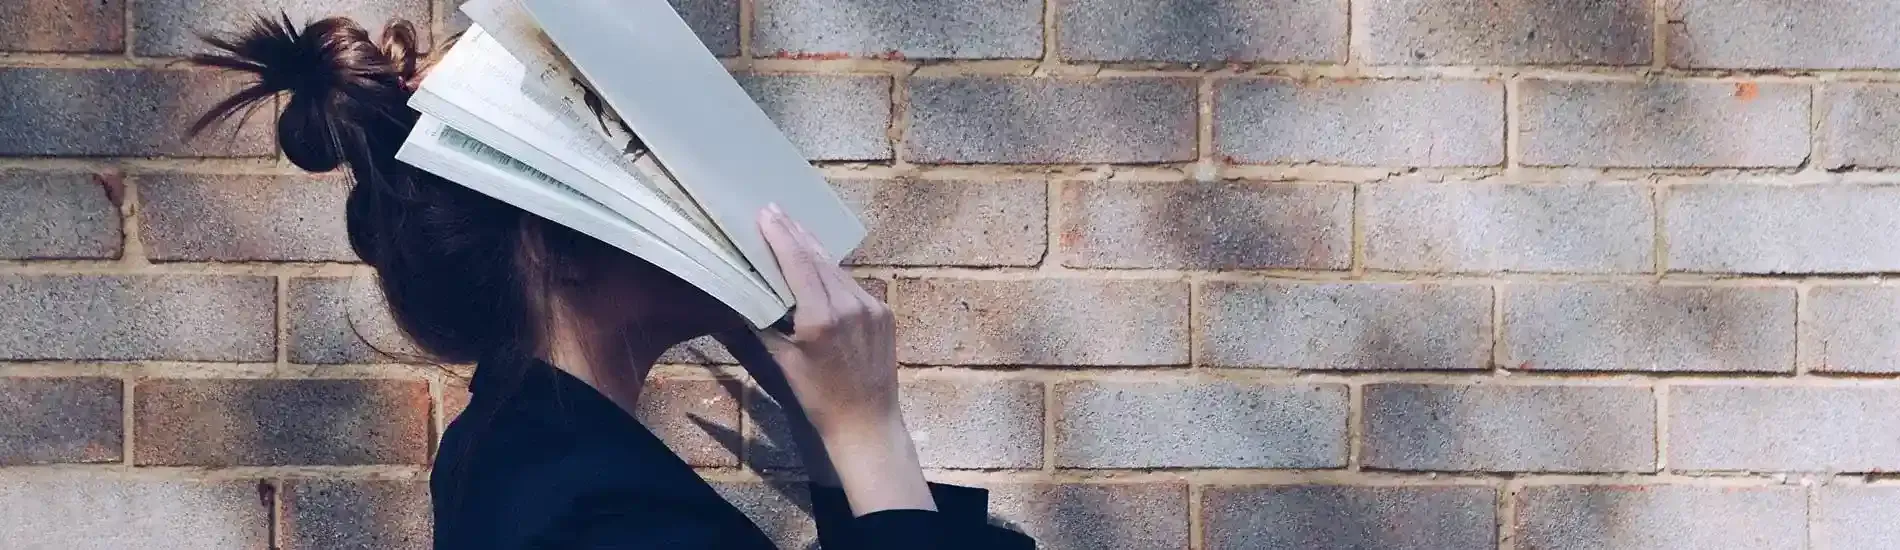 Woman with a book over her face stressed about exams